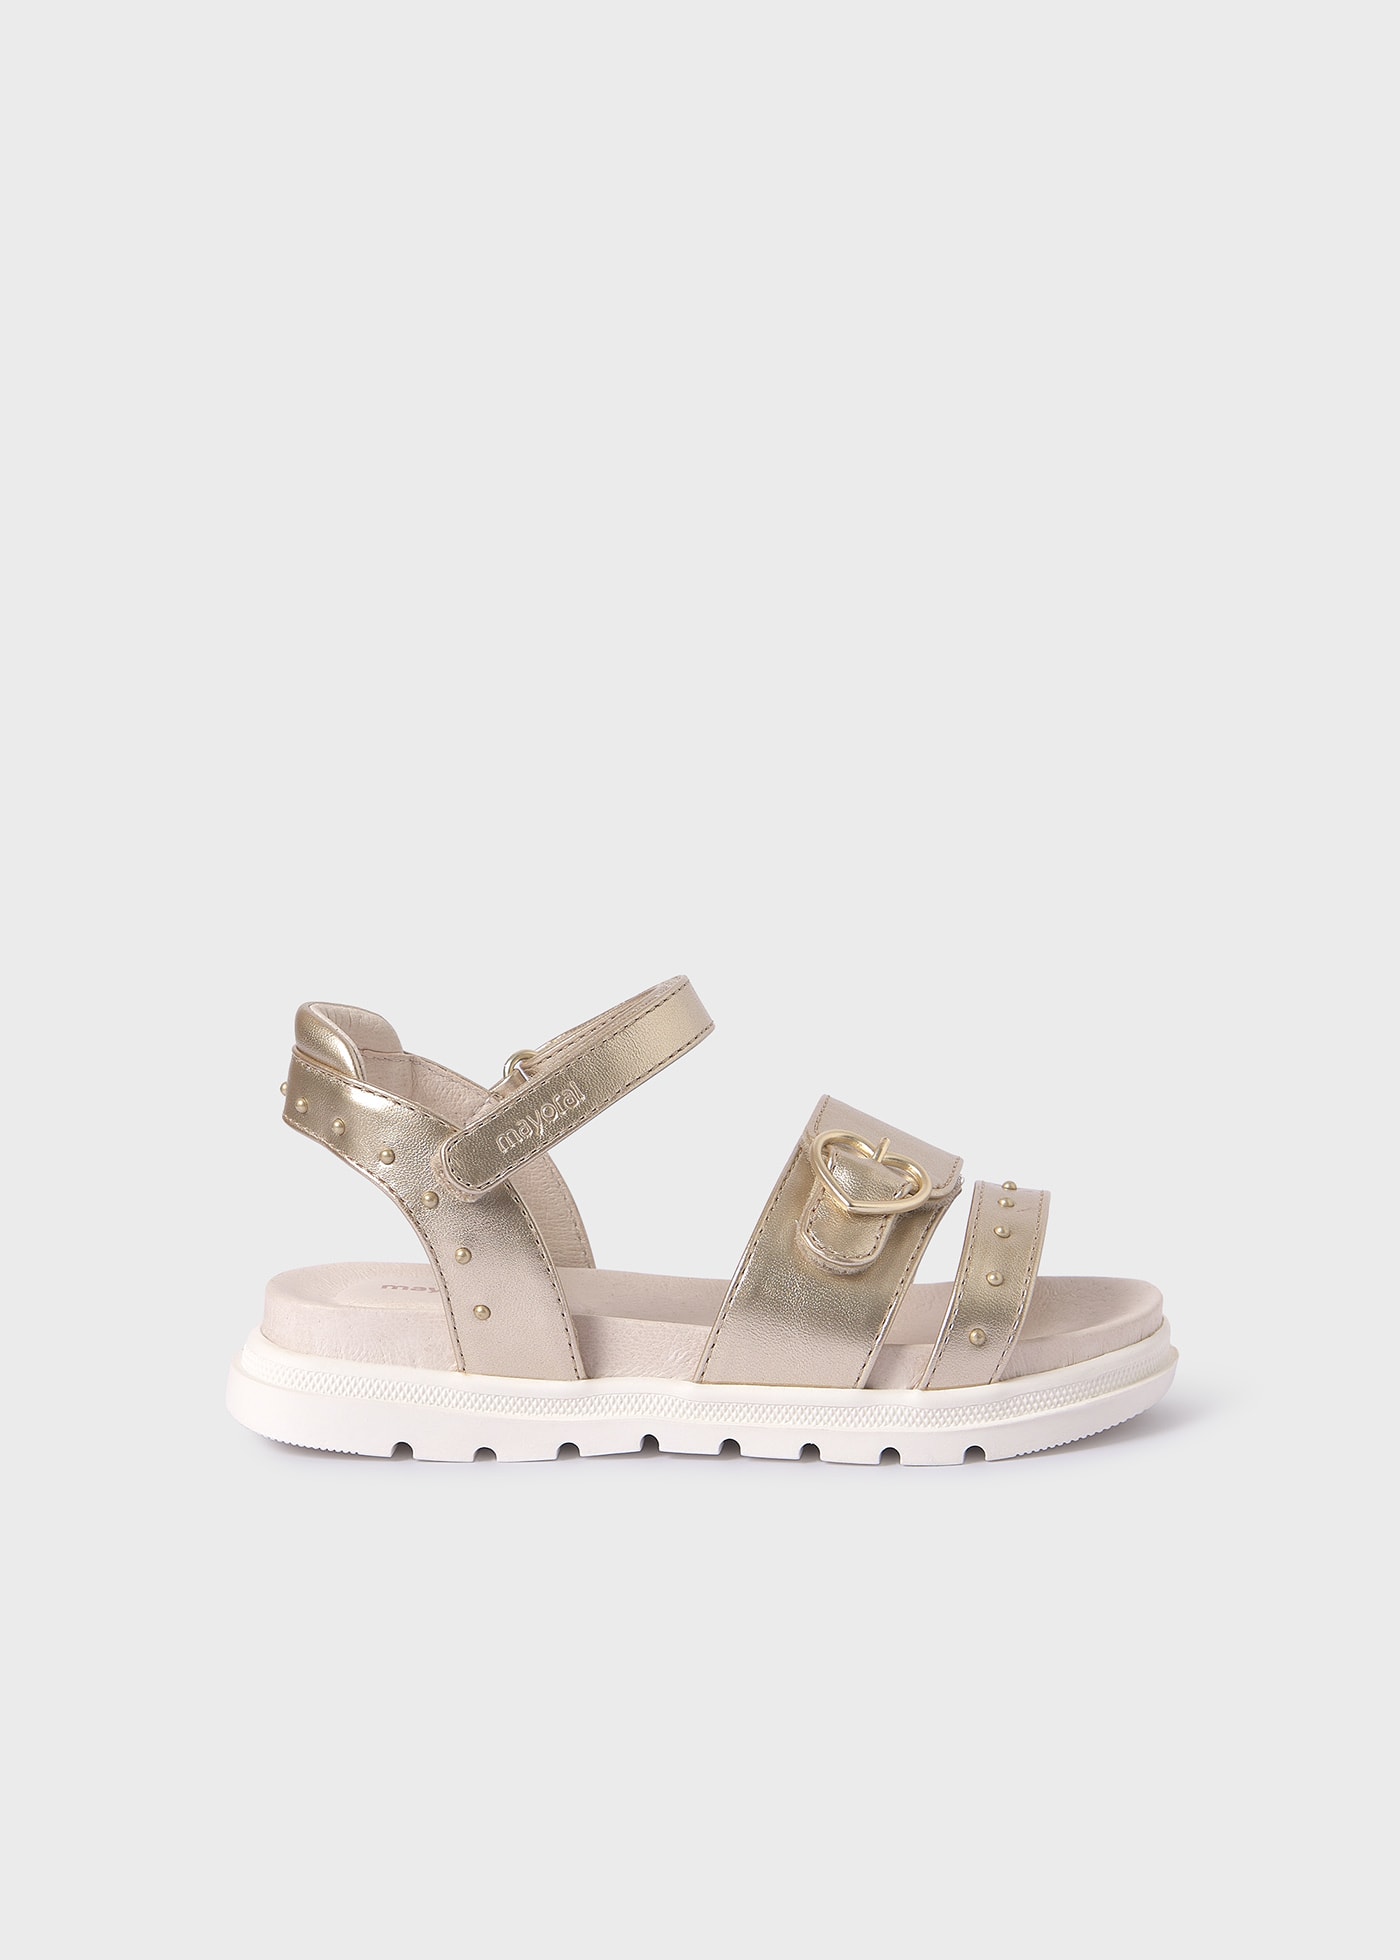 Girls studs sandals sustainable leather